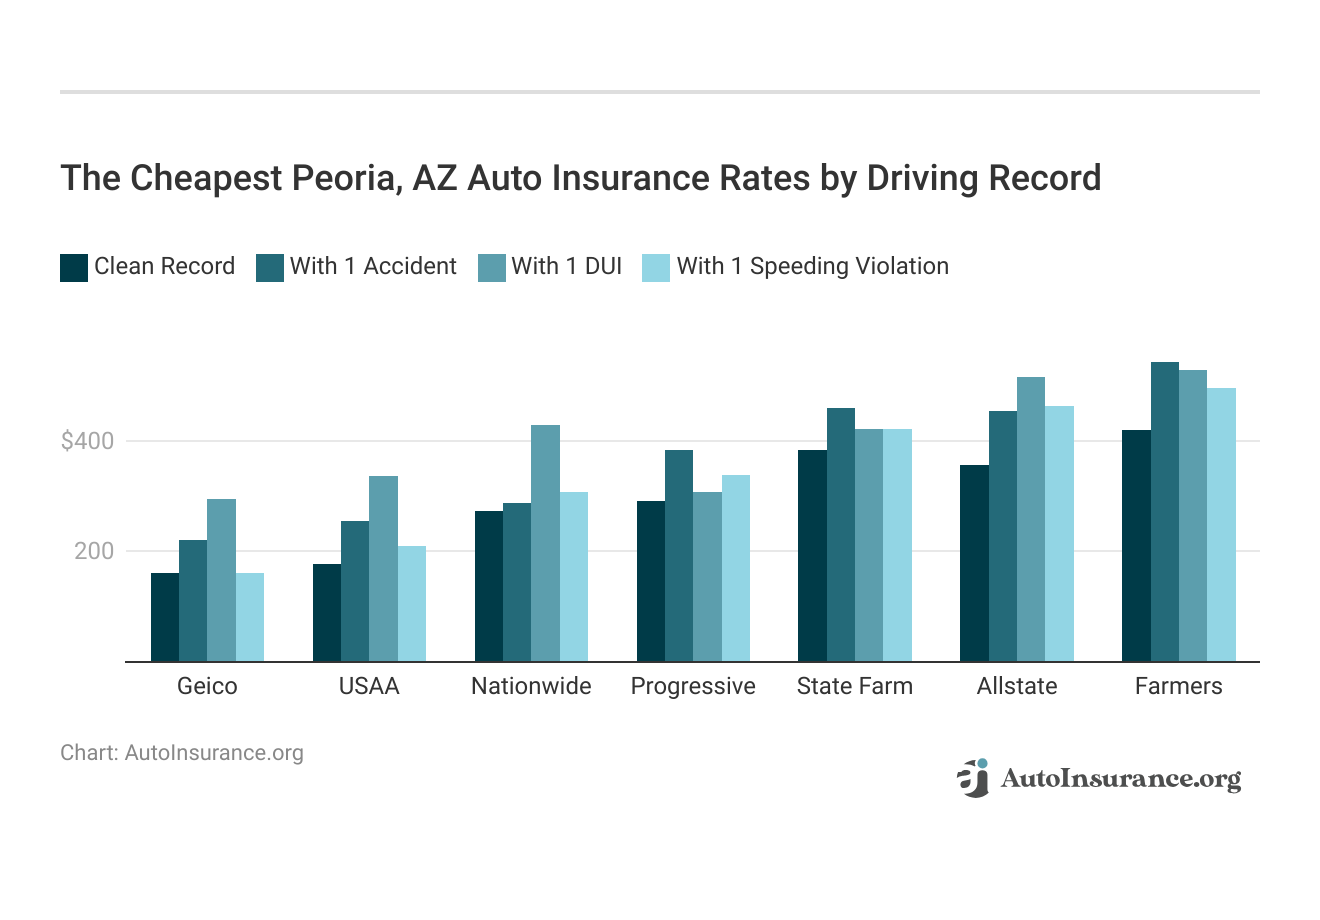 <h3>The Cheapest Peoria, AZ Auto Insurance Rates by Driving Record</h3>